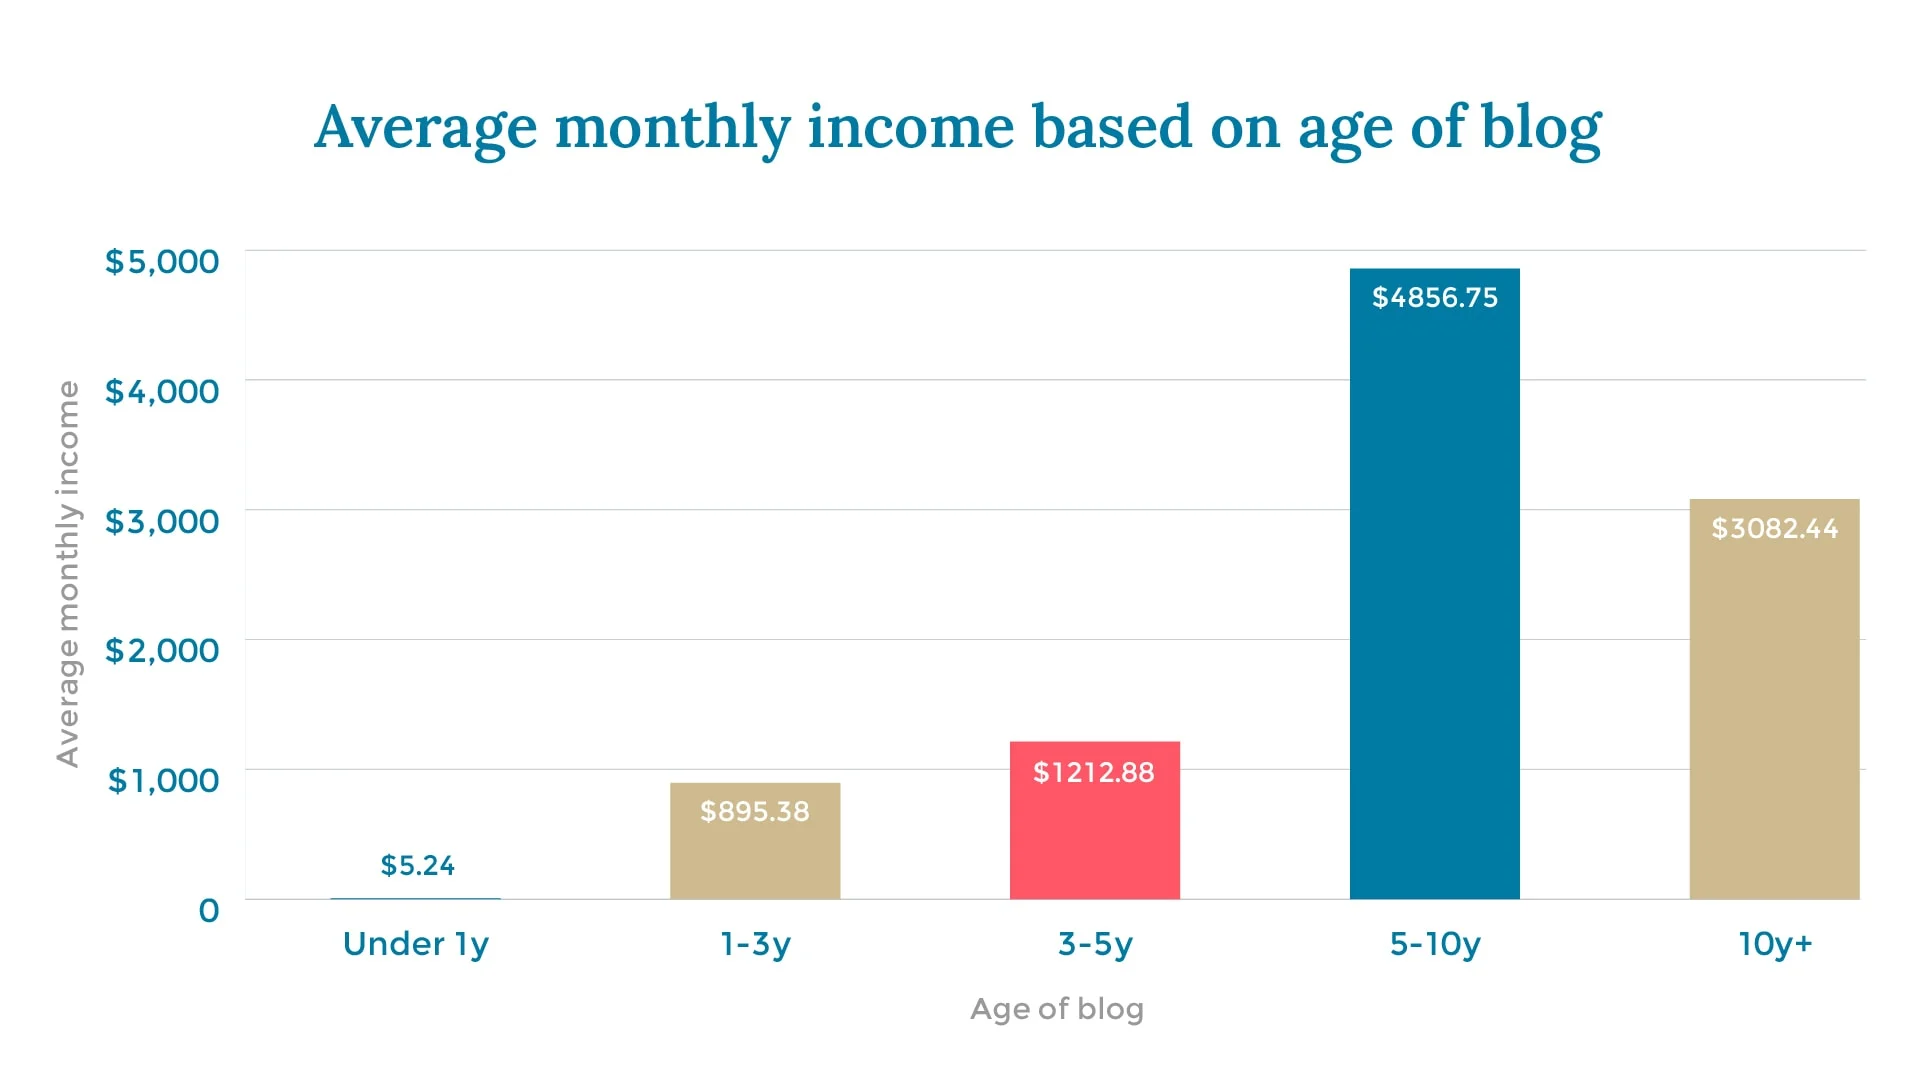 A graph showing the average monthly income of blogs that are: less than one year old, one to three years old, three to five years old, five to ten years old, and over ten years old.